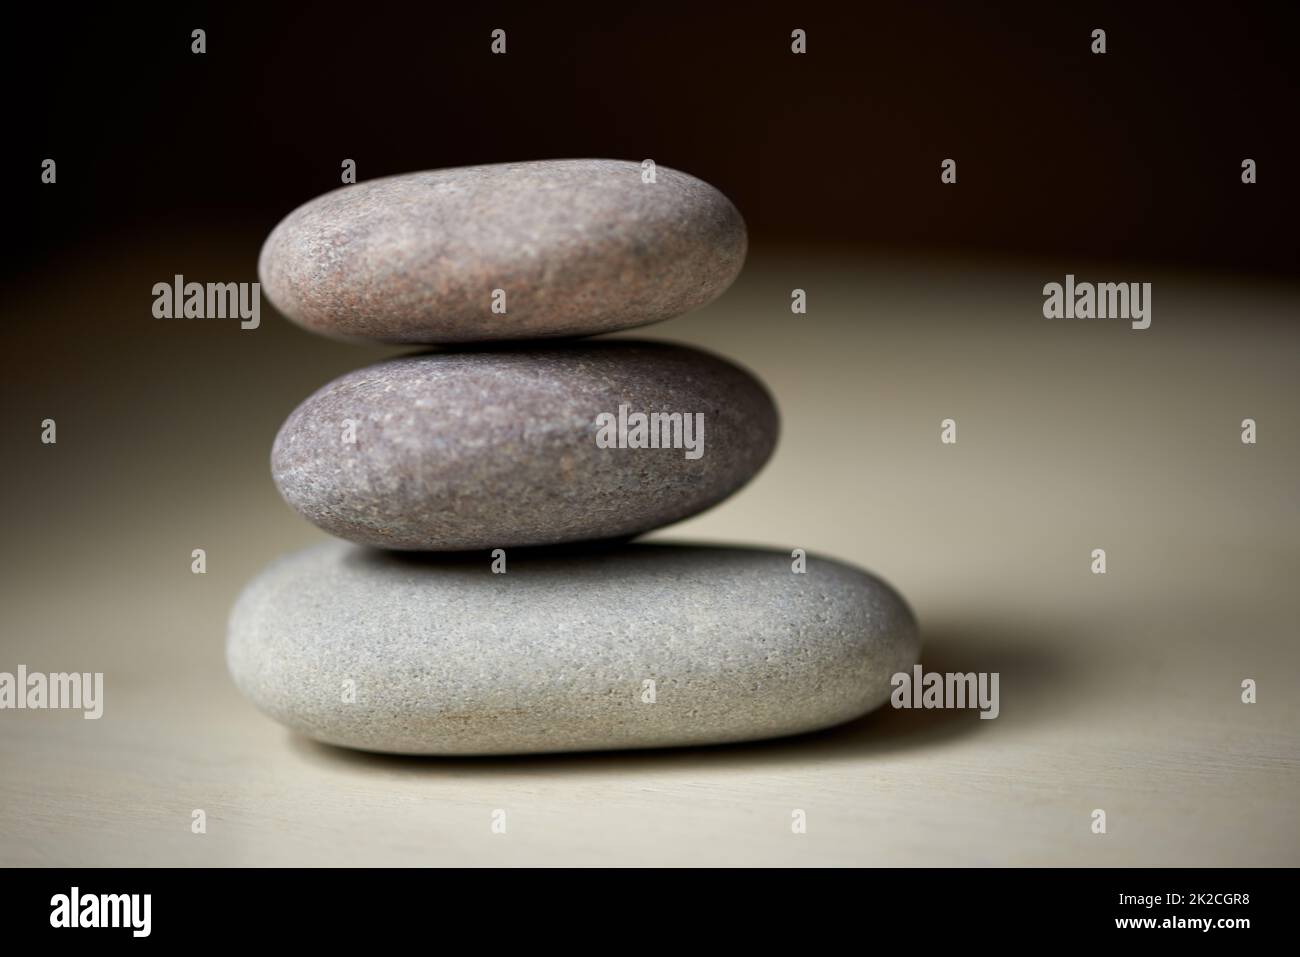 Zen balance. Three stones balanced on top of each other in natural light. Stock Photo